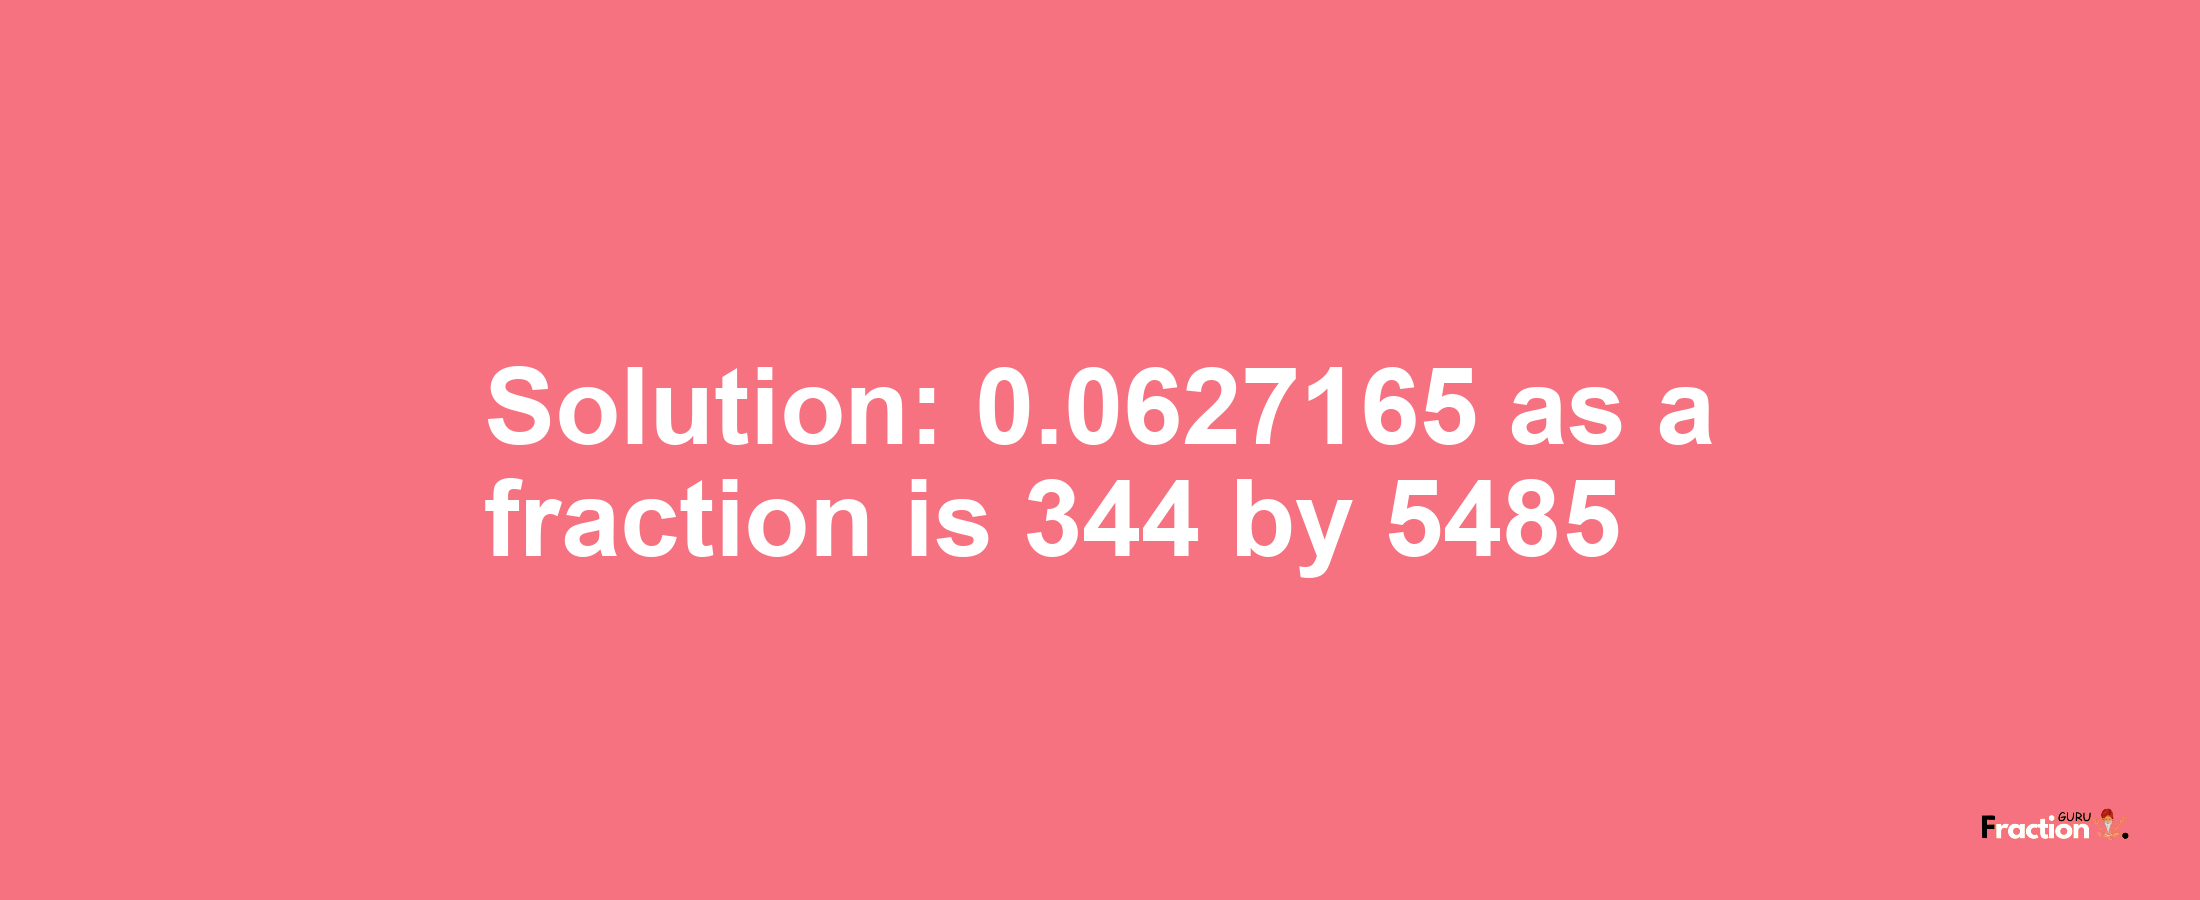 Solution:0.0627165 as a fraction is 344/5485